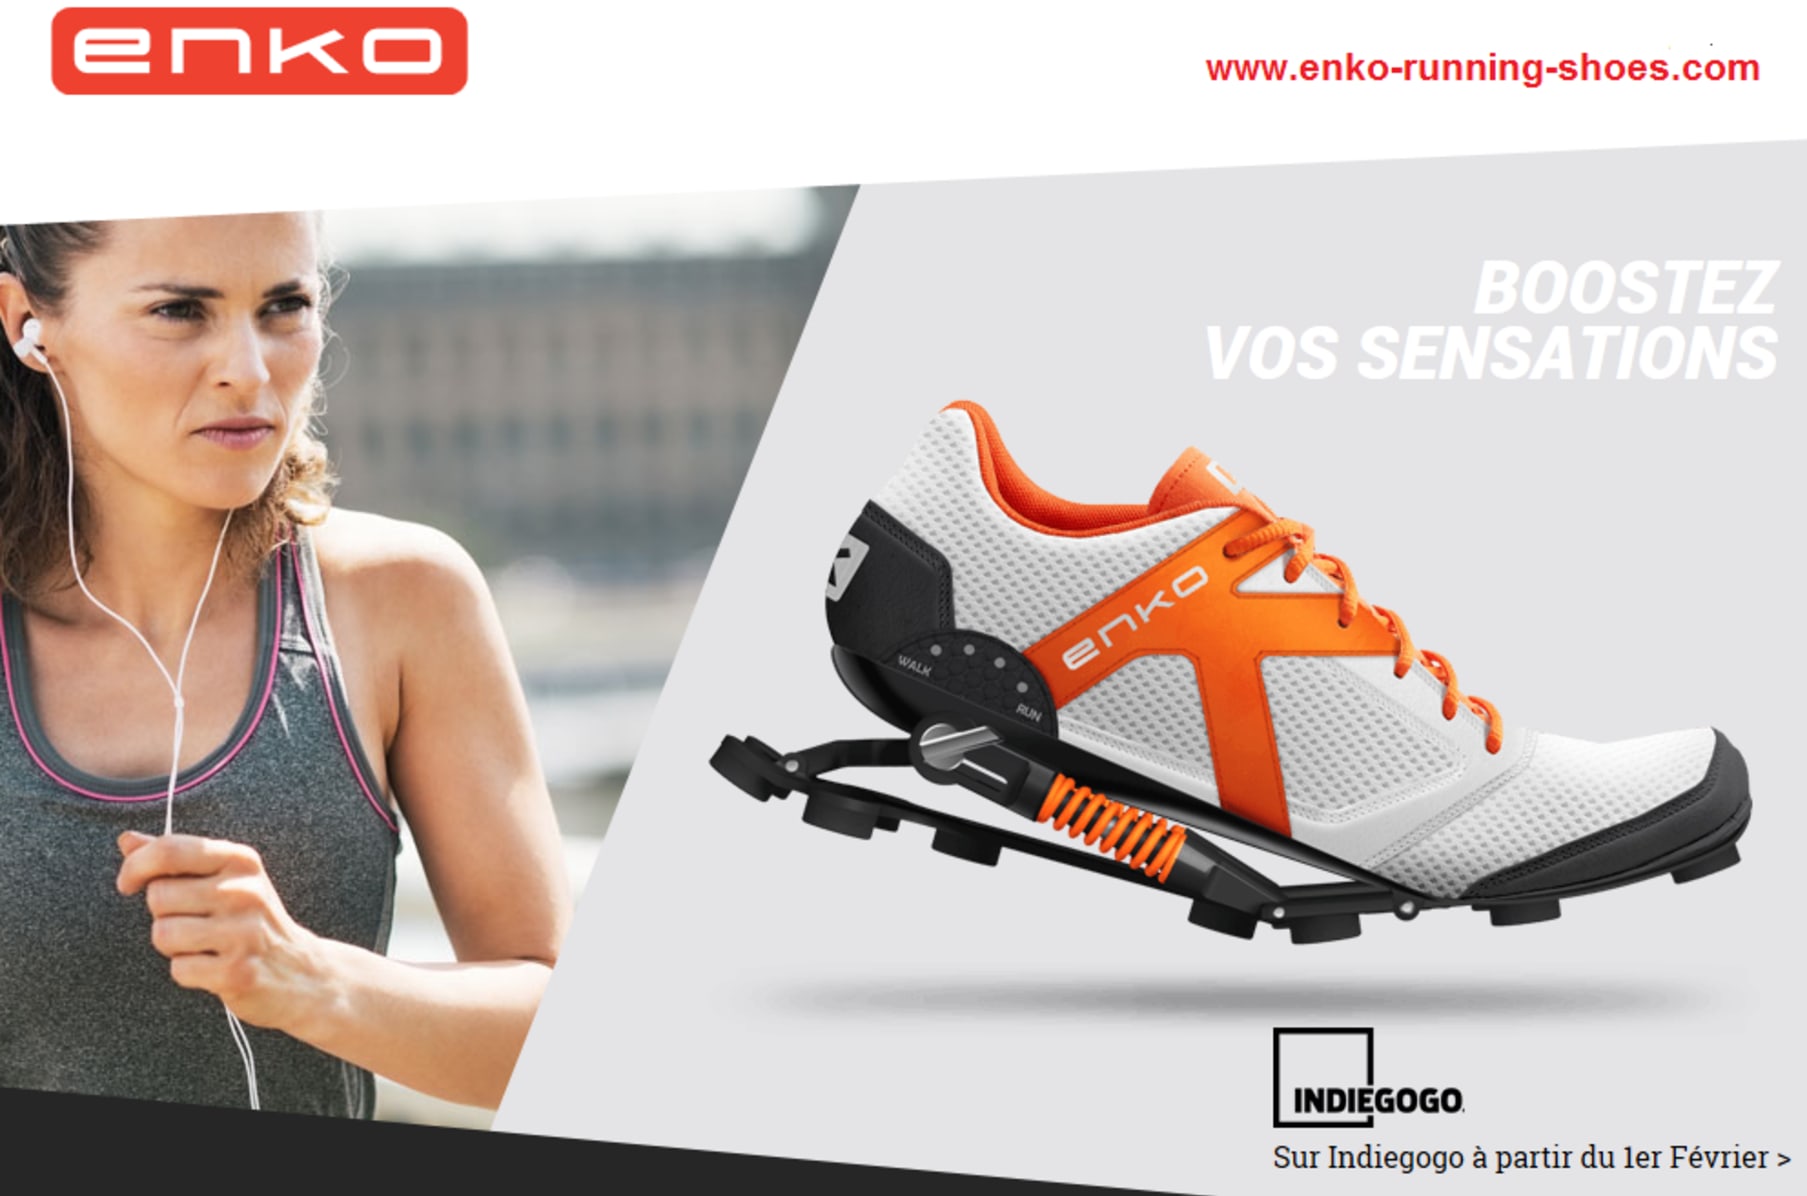 enko running shoes for sale